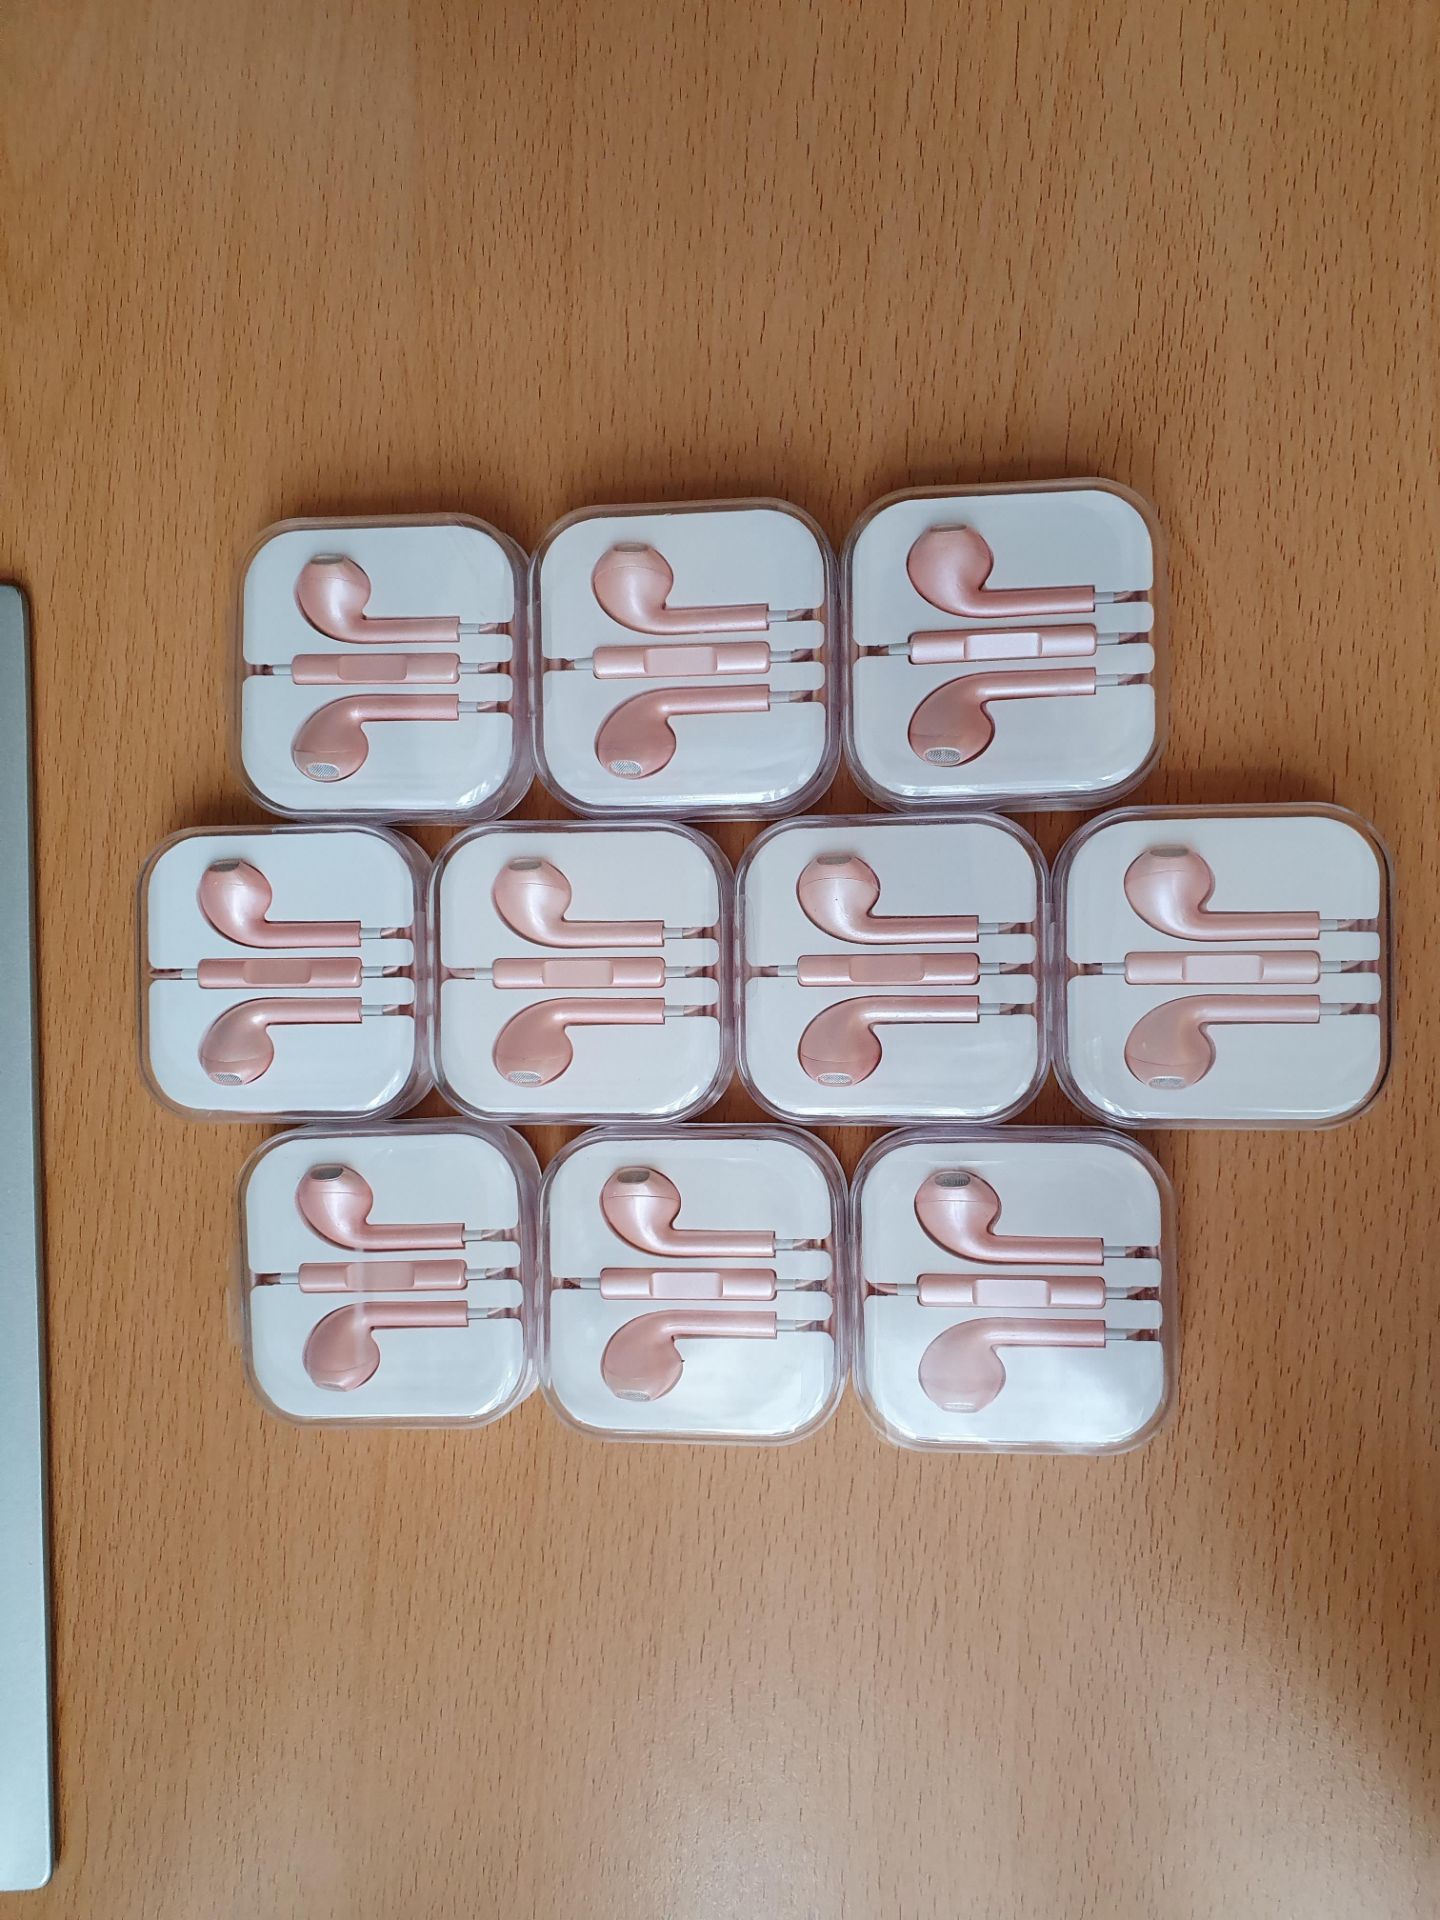 10 x new rose gold earphones rrp £50 pwerfect xmas gifts - Image 2 of 4